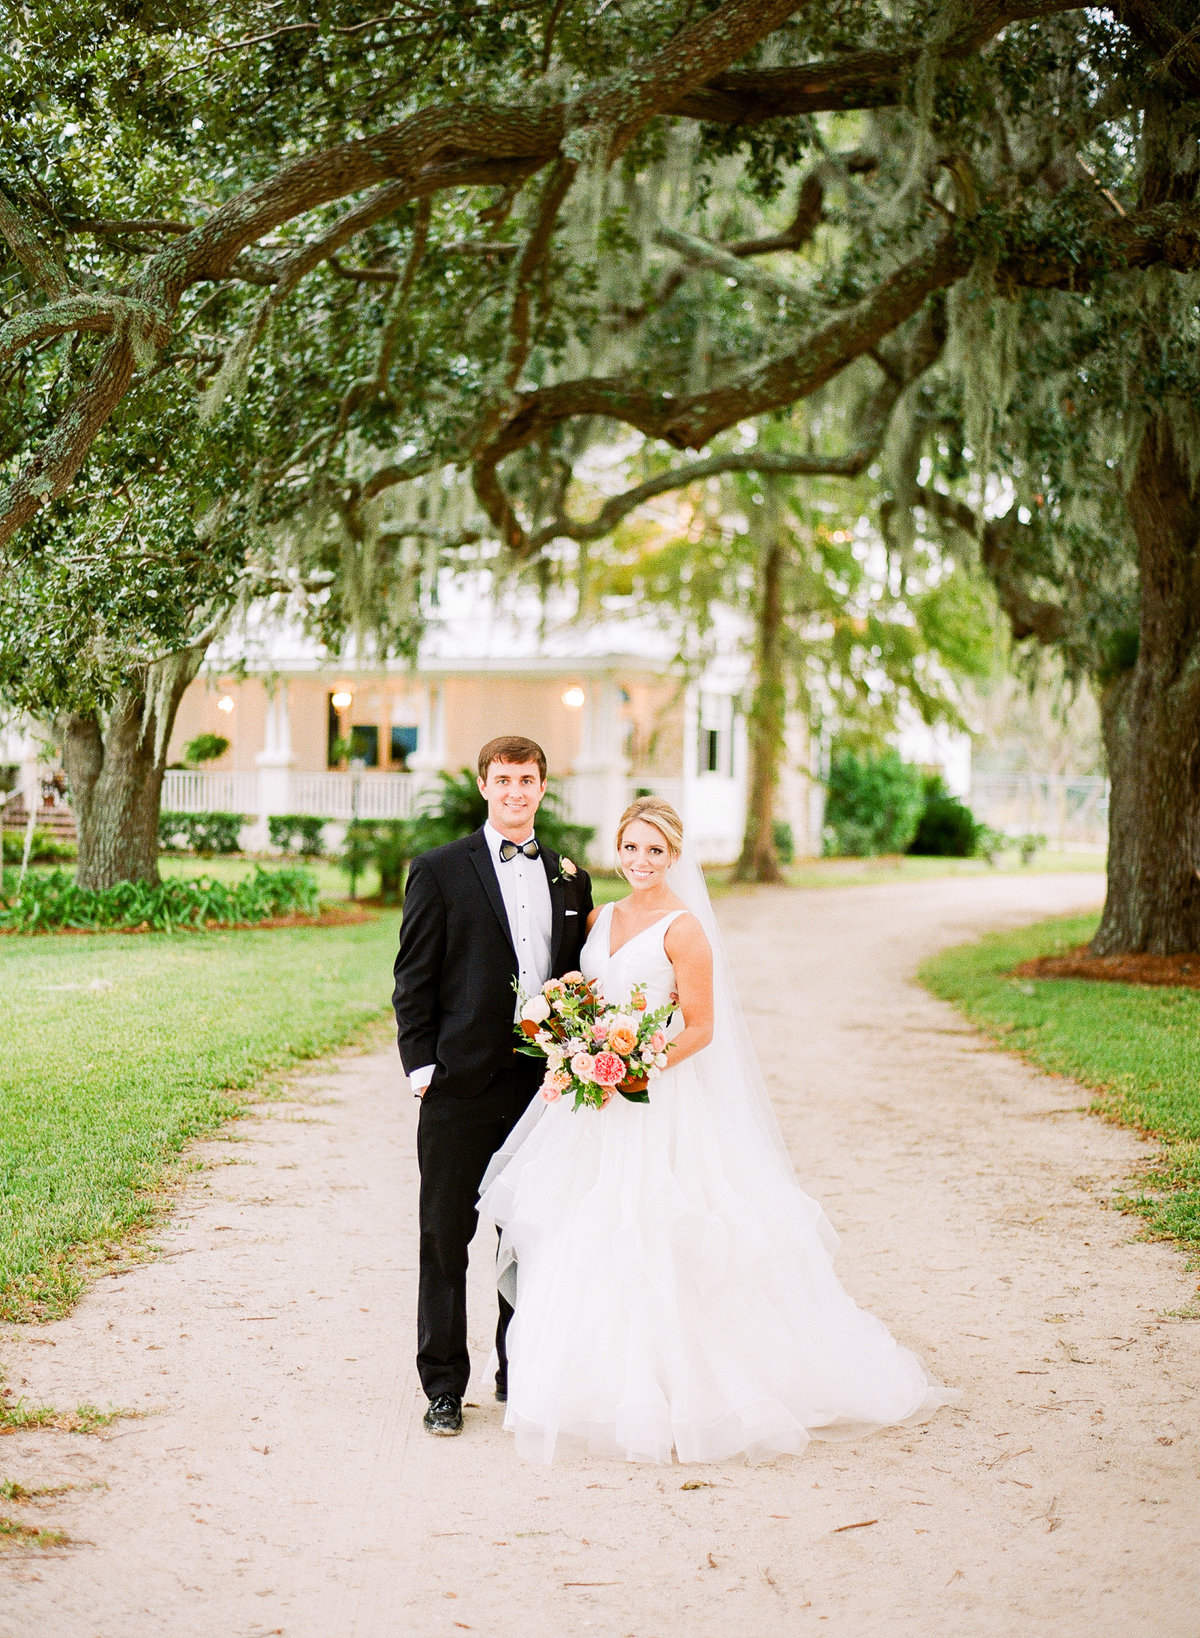 Classic Charleston Newlyweds Stand in front Classic White Plantation House under Spanish Moss Live Oaks Trees